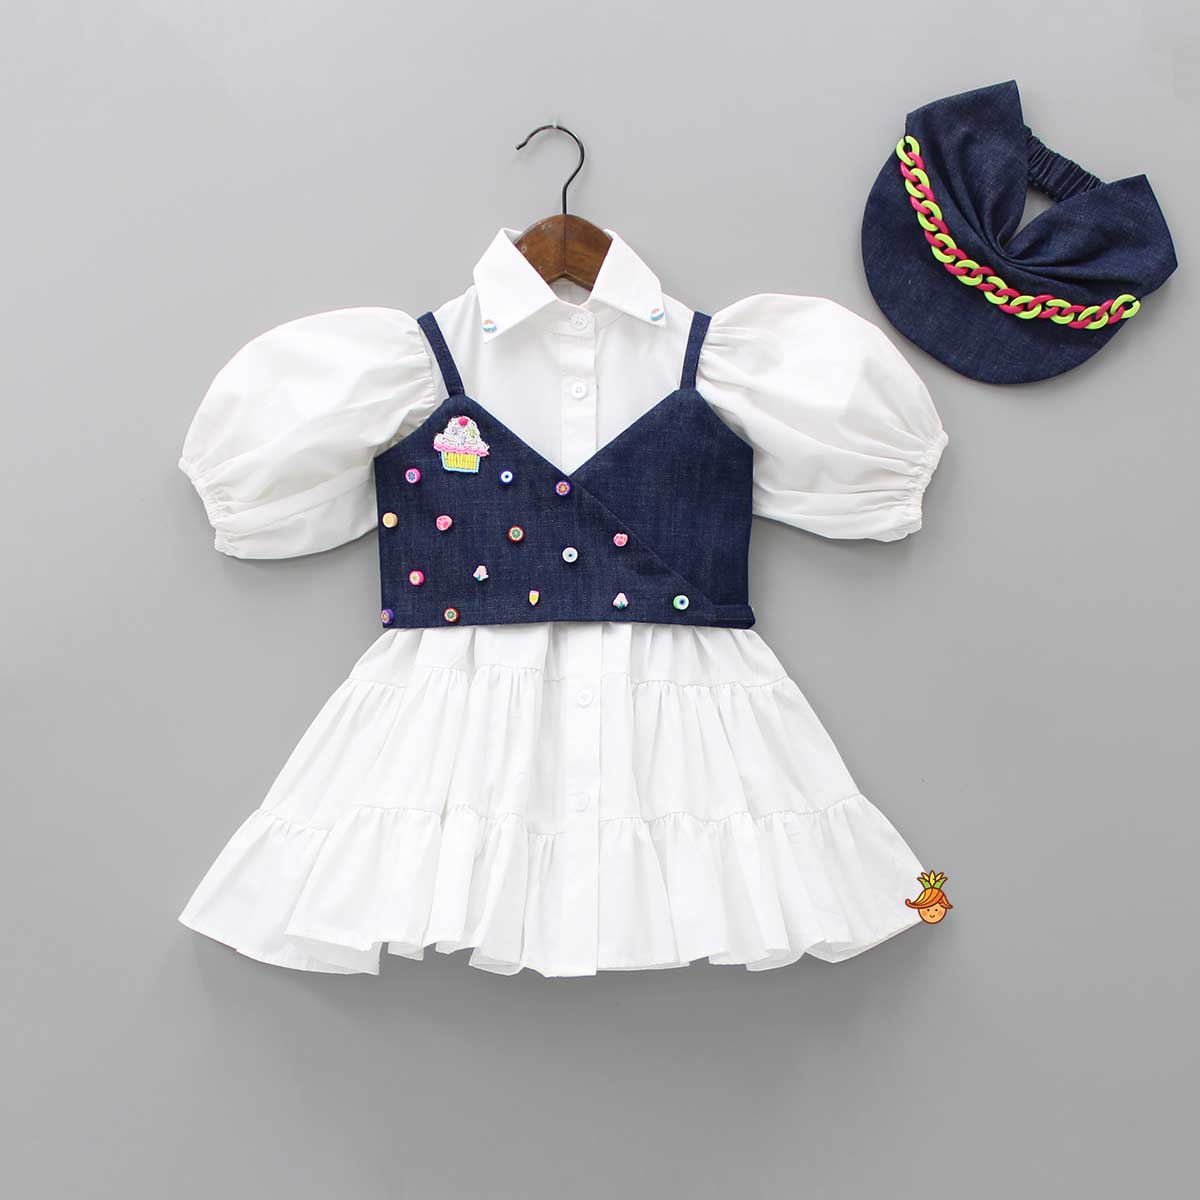 White Shirt Style Tiered Dress With Denim Top And Cap